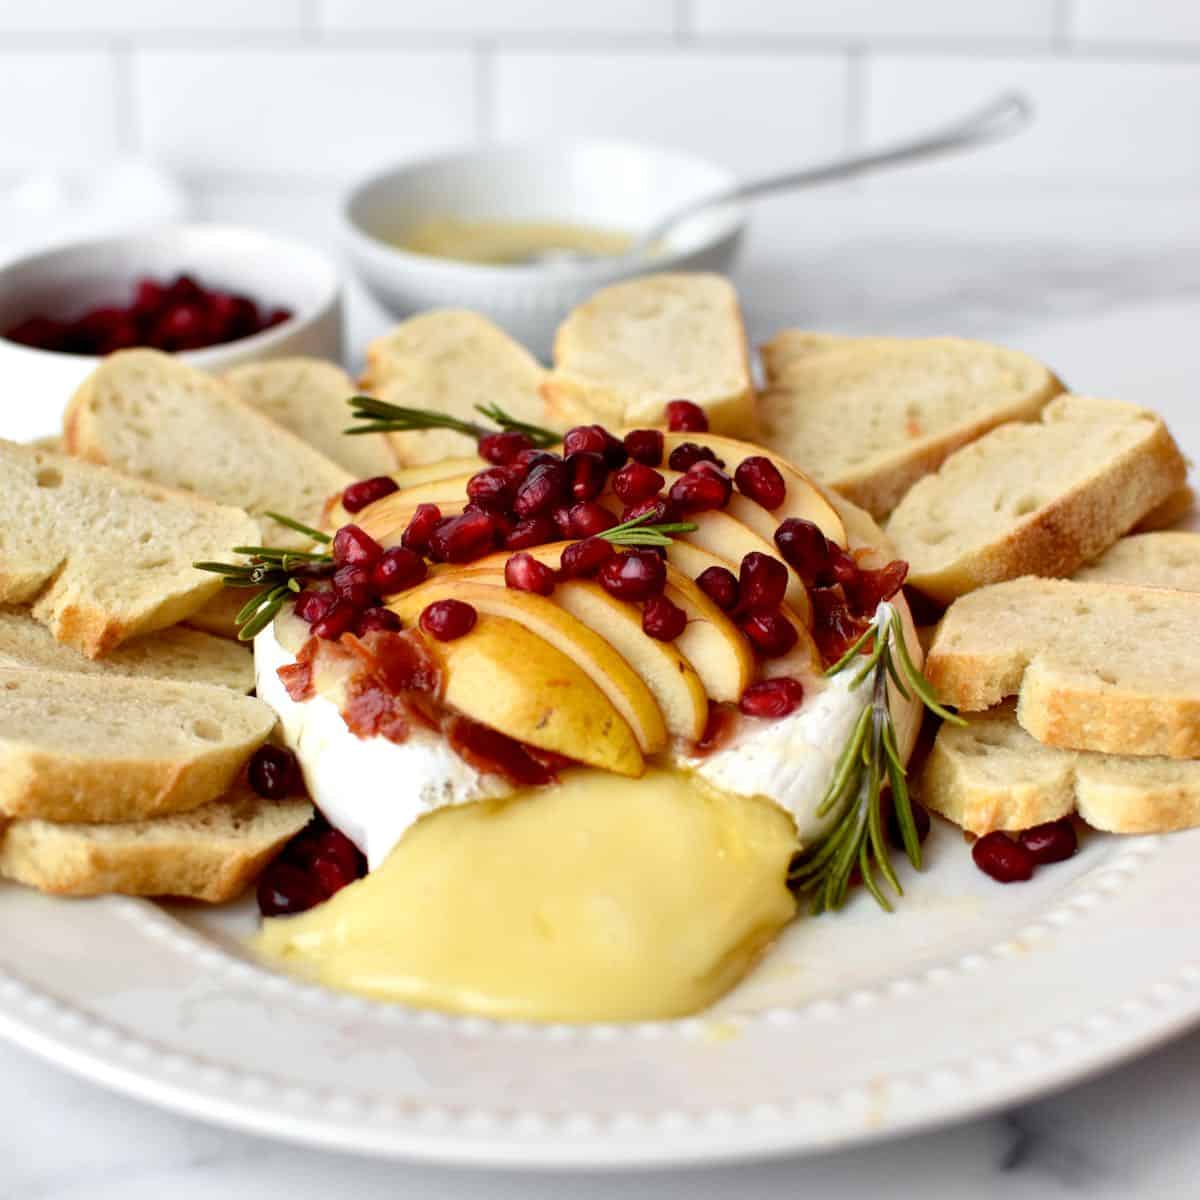 Side view of baked brie, topped with pears, prosciutto and pomegranate. The brie is surrounded by sliced bread and is oozing melted cheese.